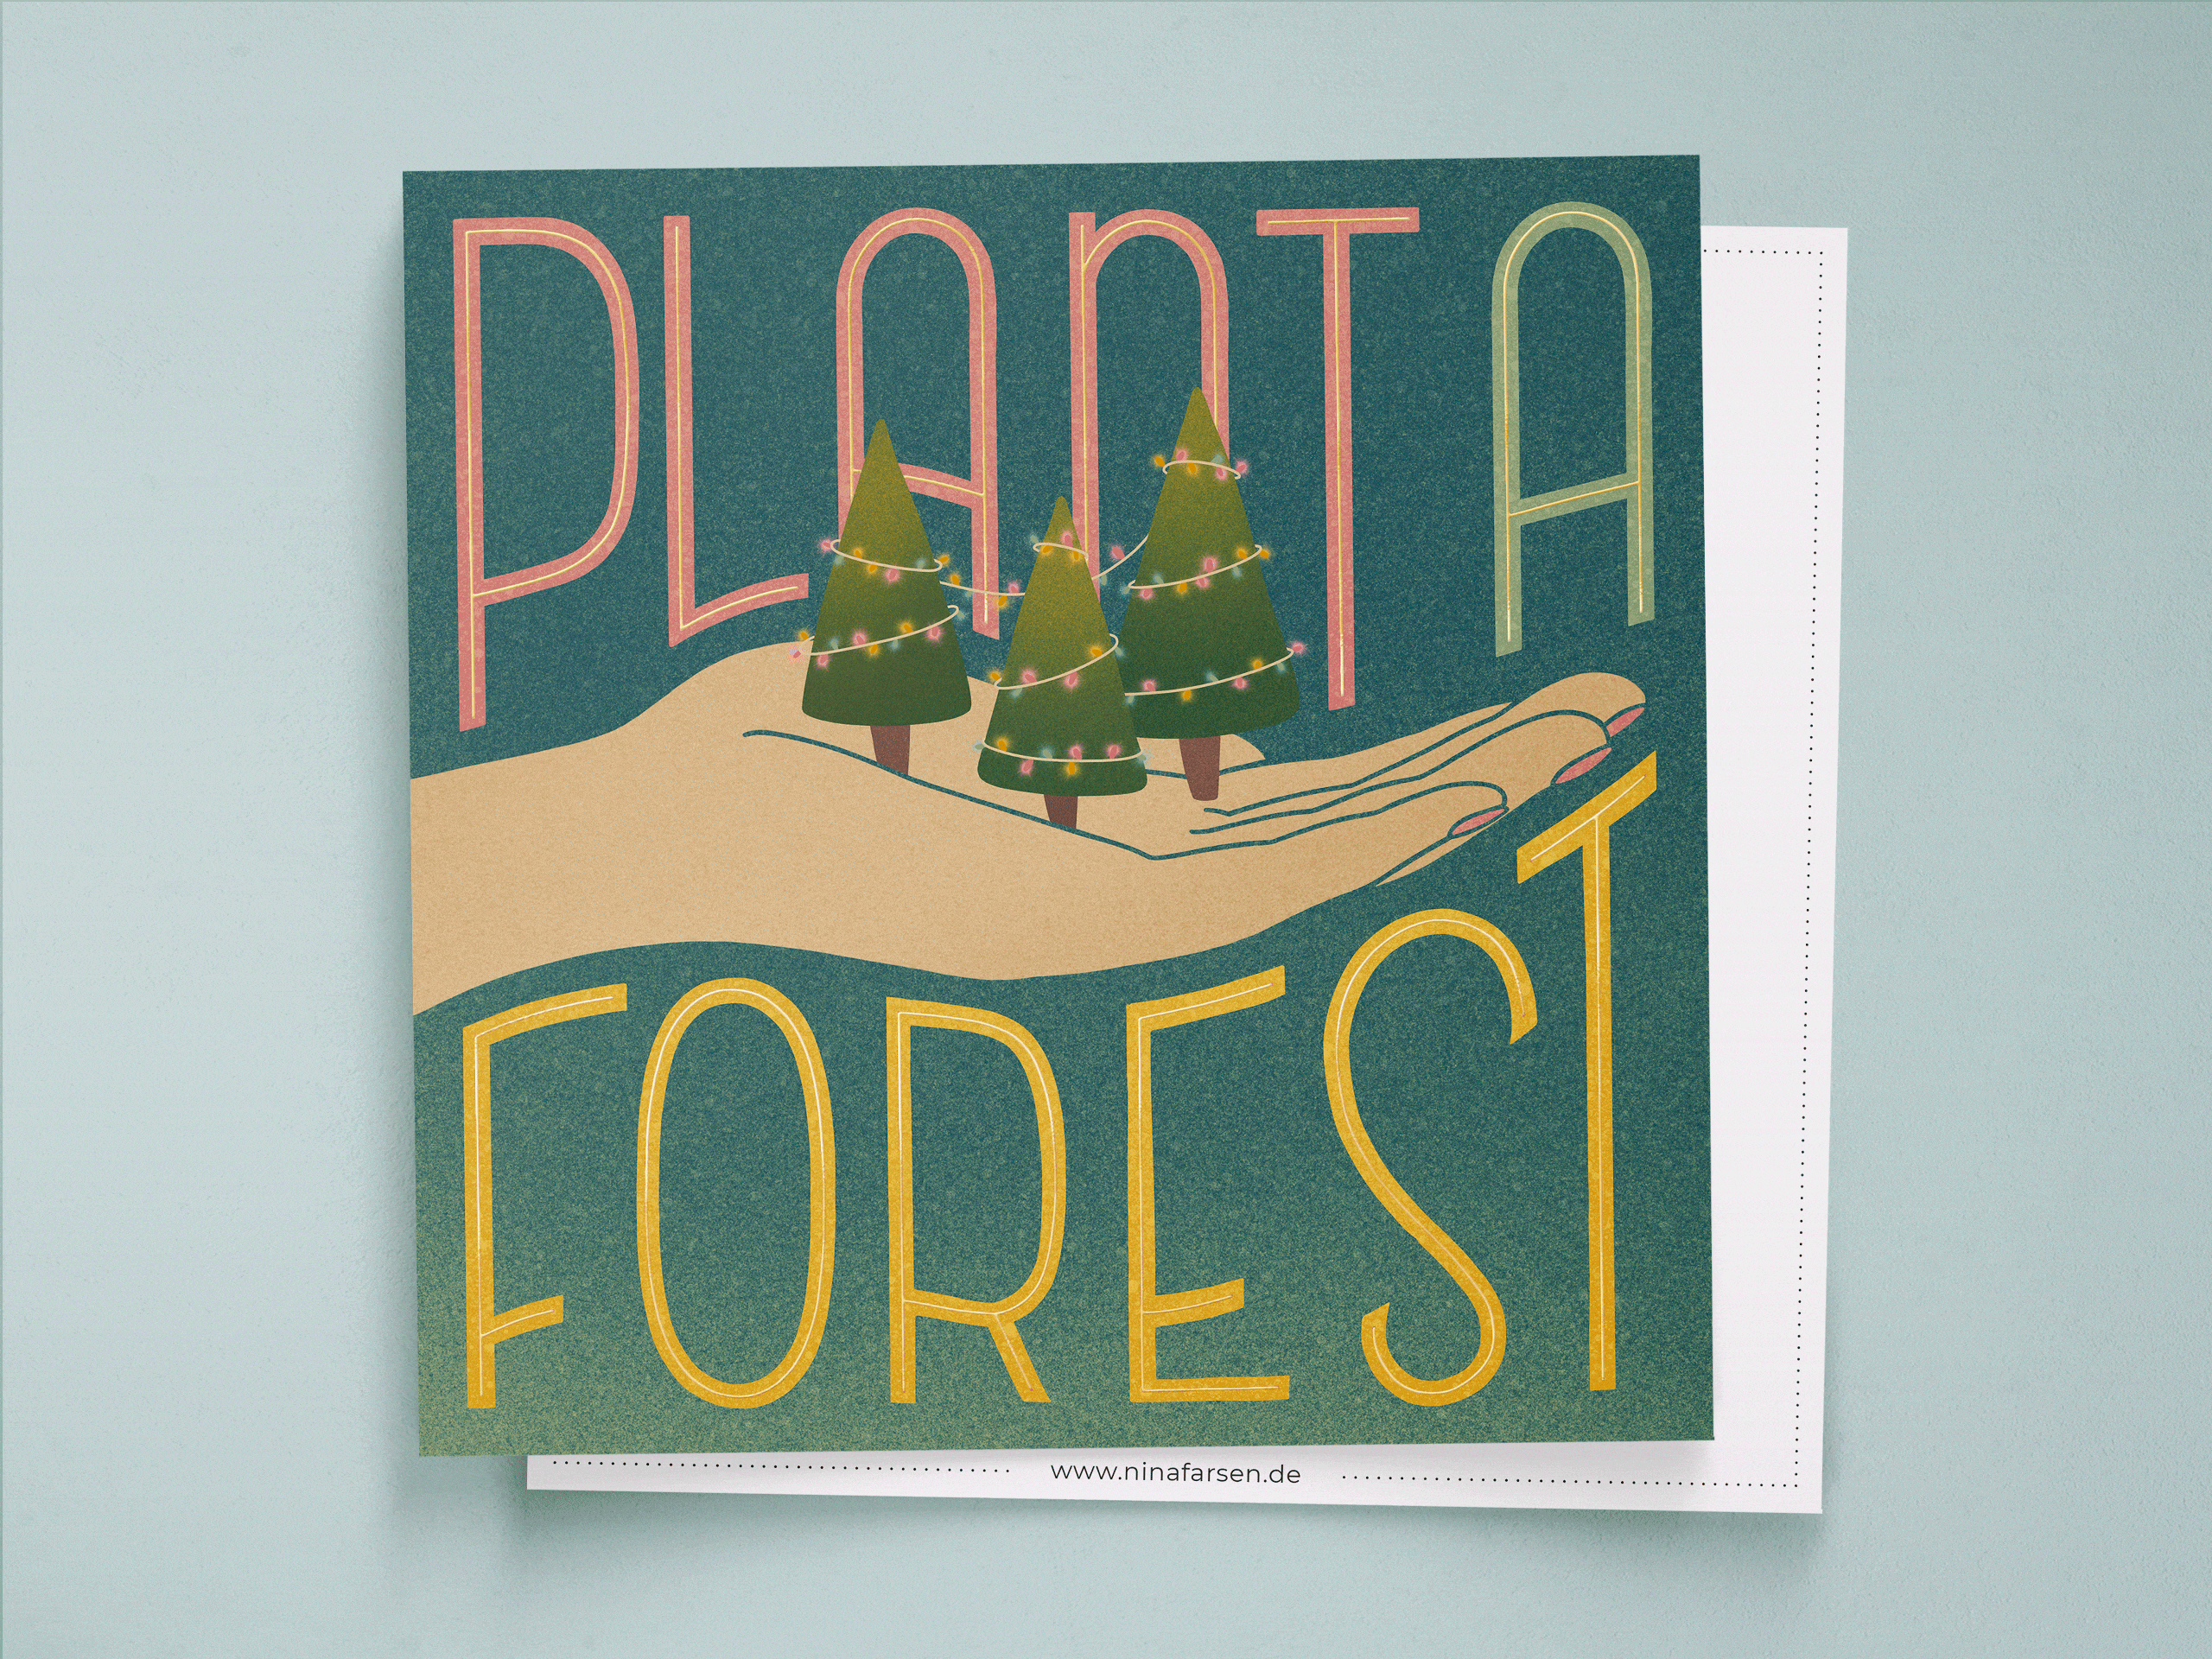 Postcard with an illustration of decorated Christmas trees in a hand. Custom lettering saying "Plant a forest".